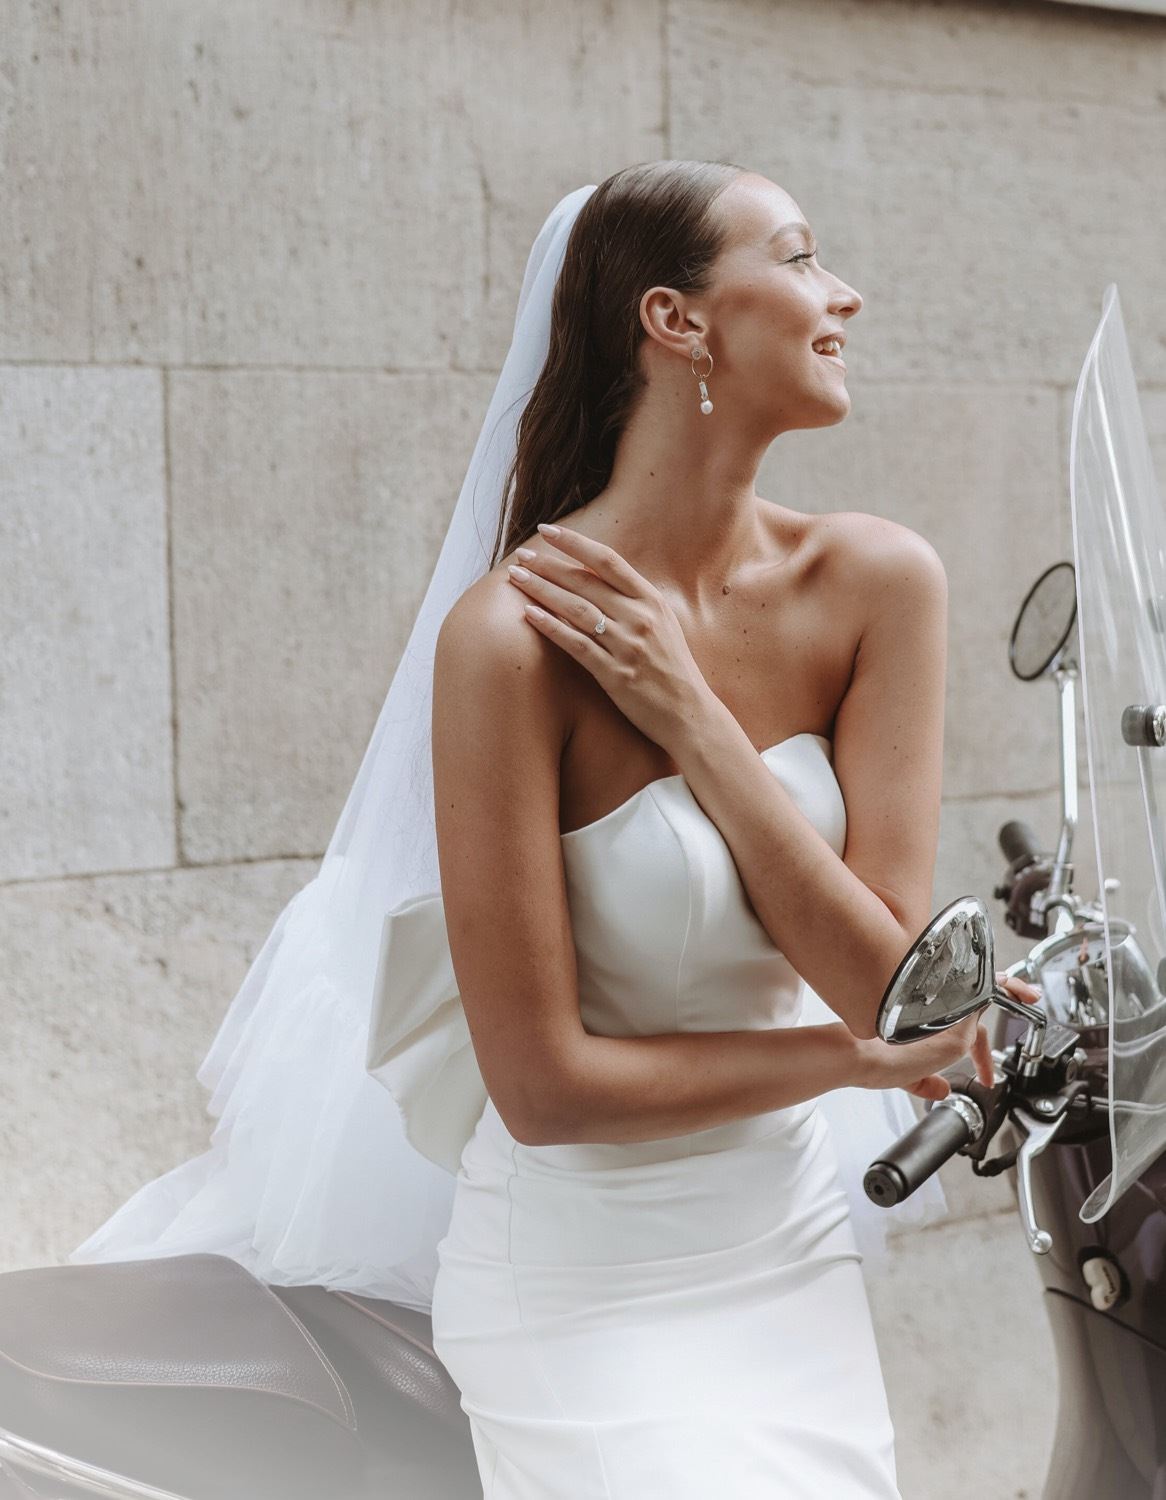 Photo of model wearing a white bridal gown on a scooter - desktop image